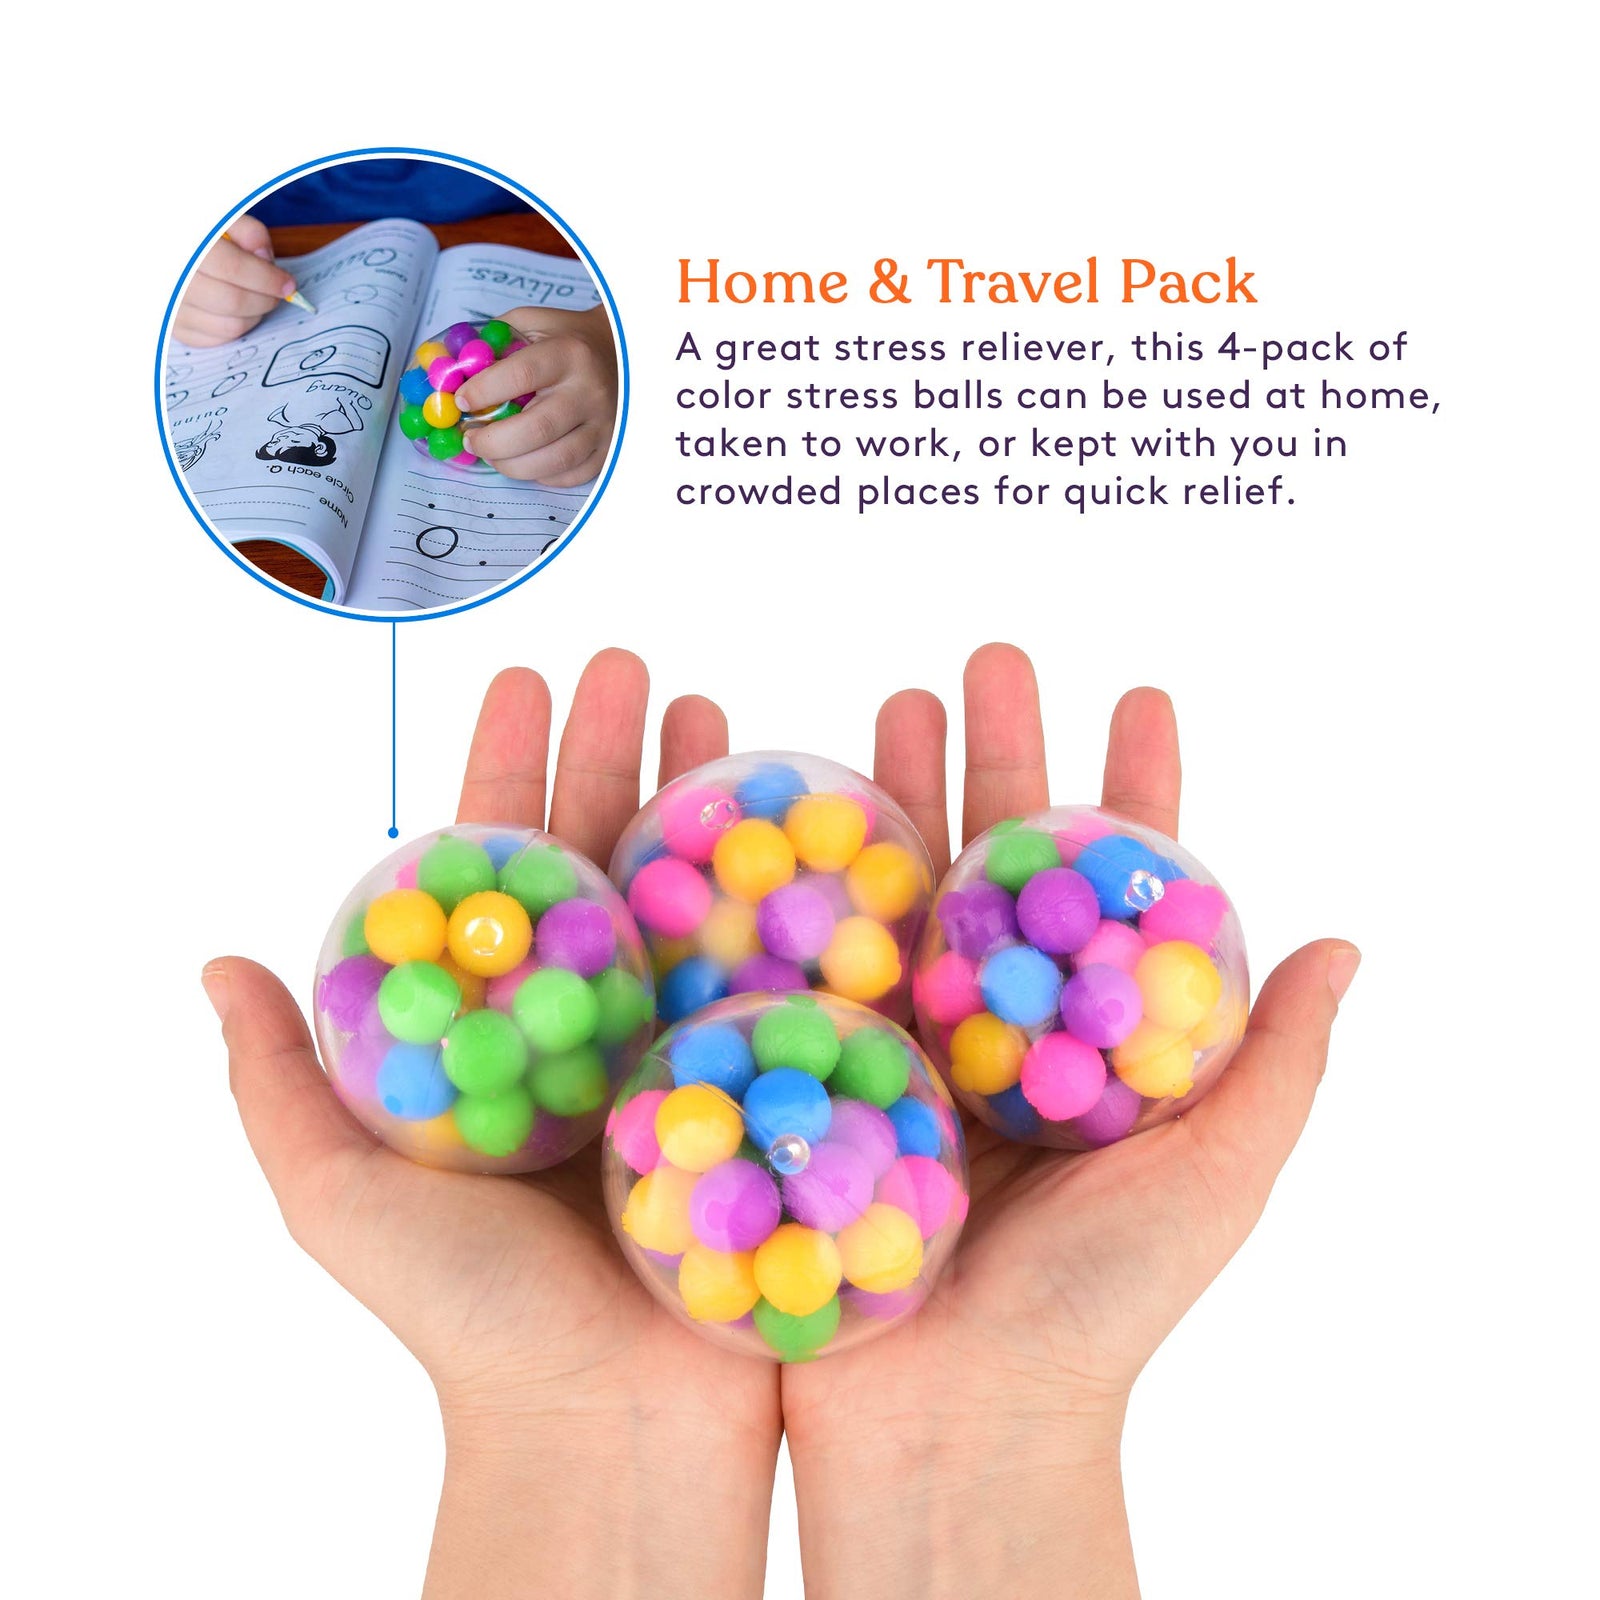 DNA Squish Stress Balls (4-Pack) Squeeze, Color Sensory Toy - Relieve Tension, Stress - Home, Travel and Office Use - Fun for Kids and Adults (Squishy)